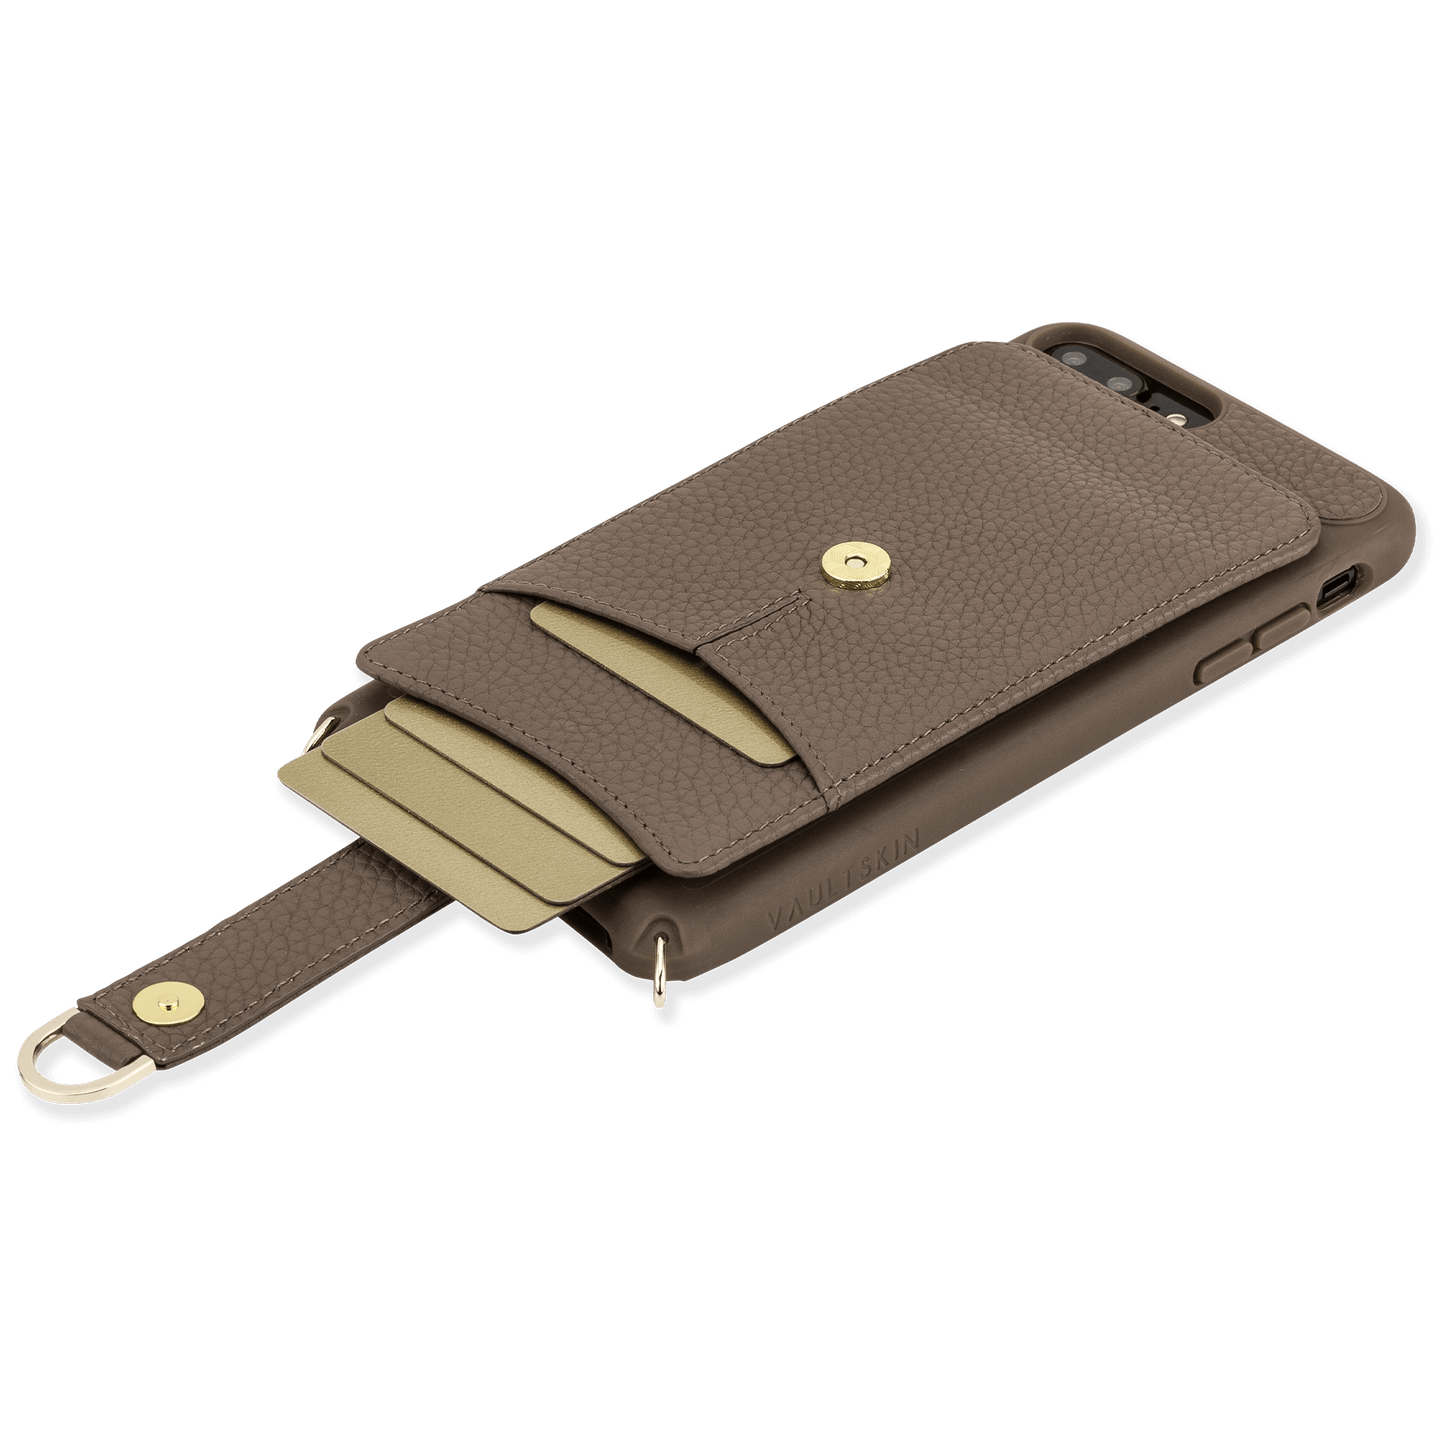 Secure Fit iPhone 7 Plus Leather